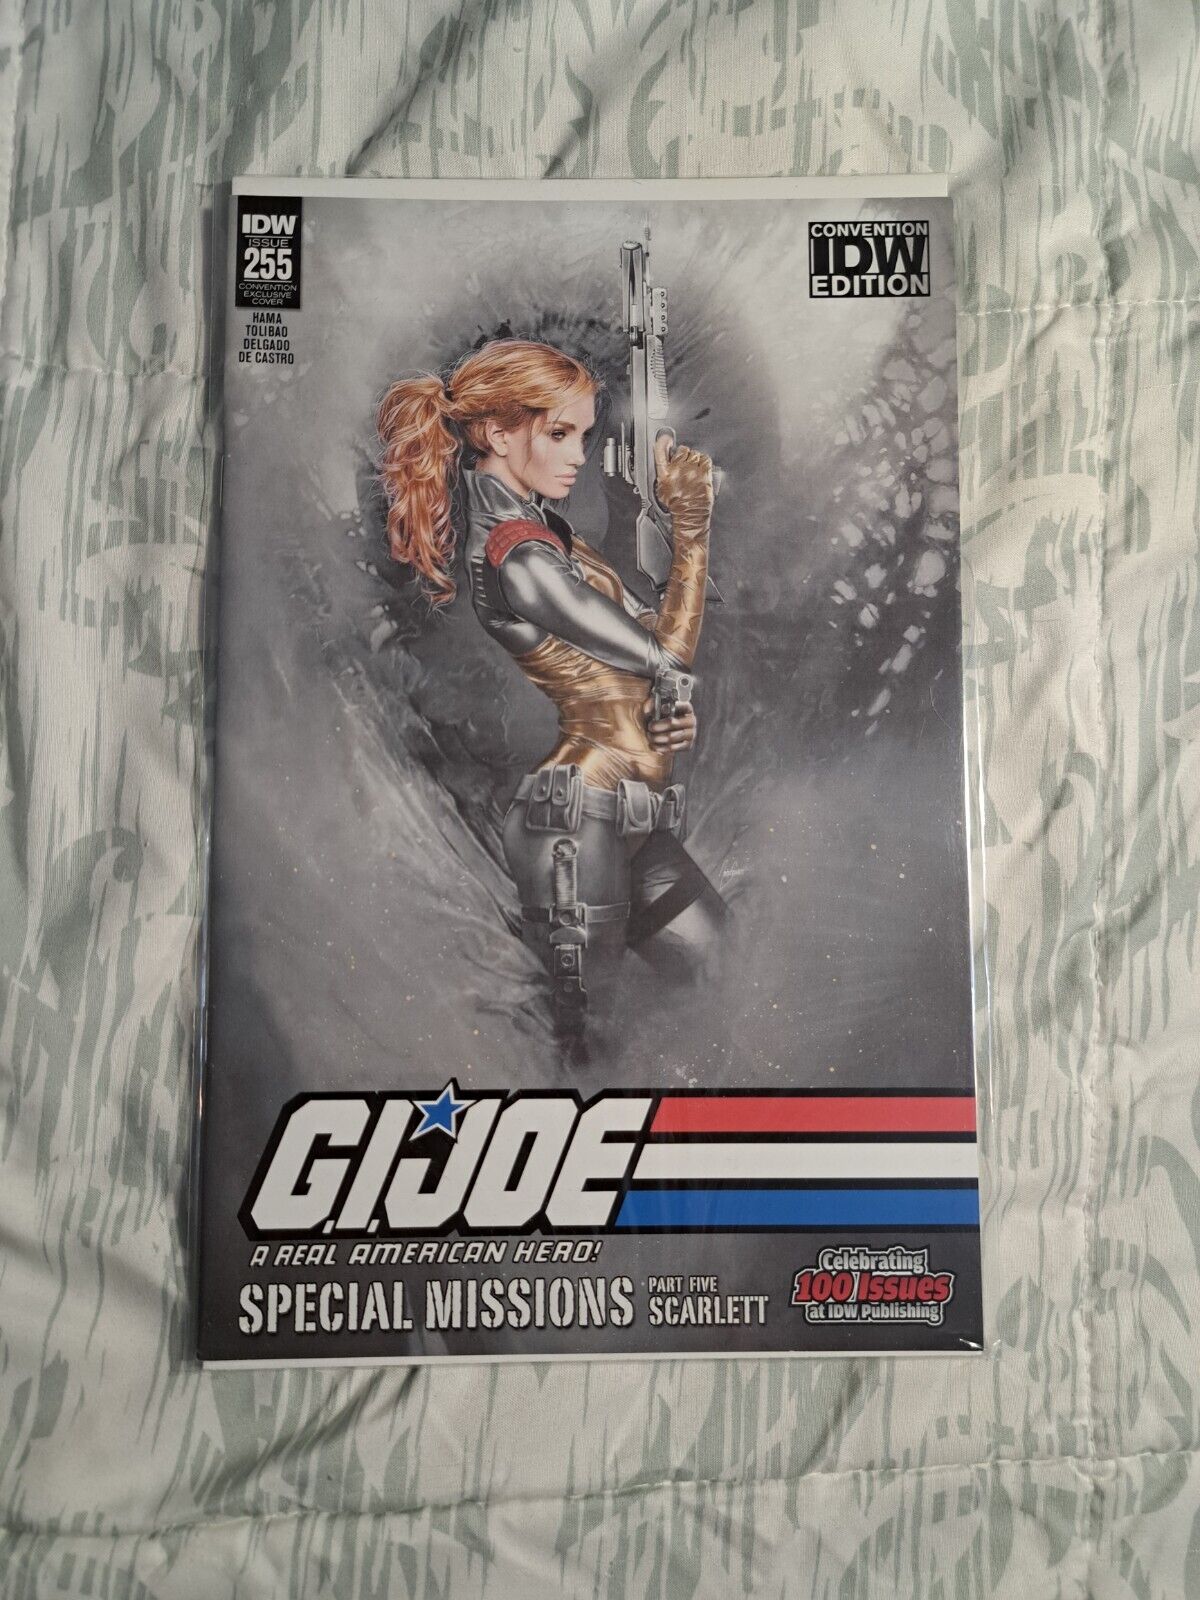 G.I. JOE #255 NATALIE SANDERS 2018 NYCC EXCLUSIVE IDW CONVENTION EDITION NM+